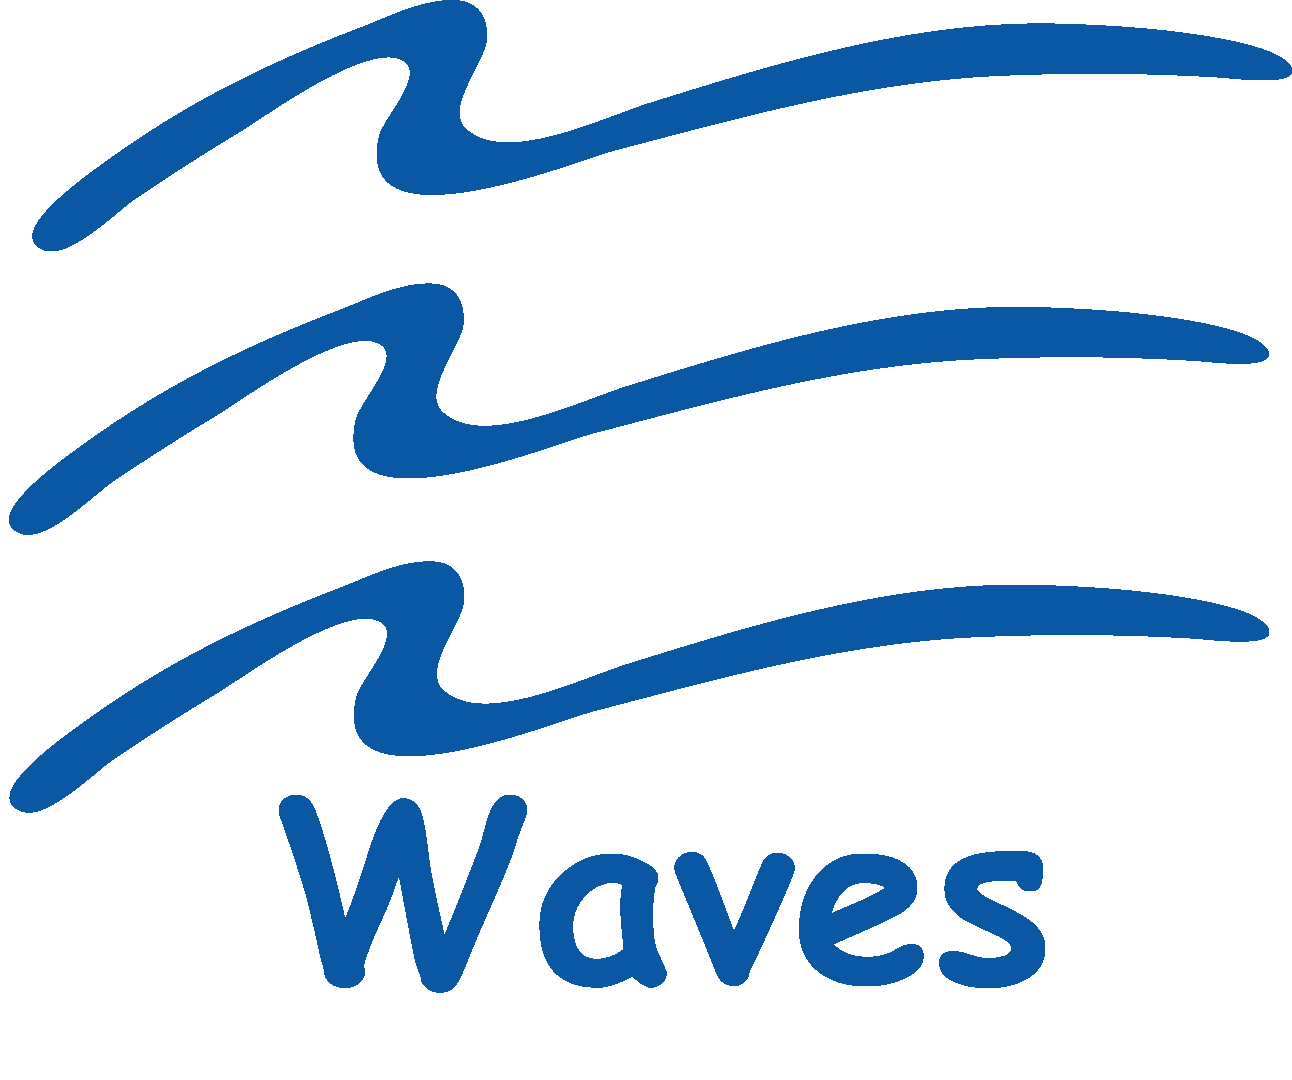 waves clipart swimming